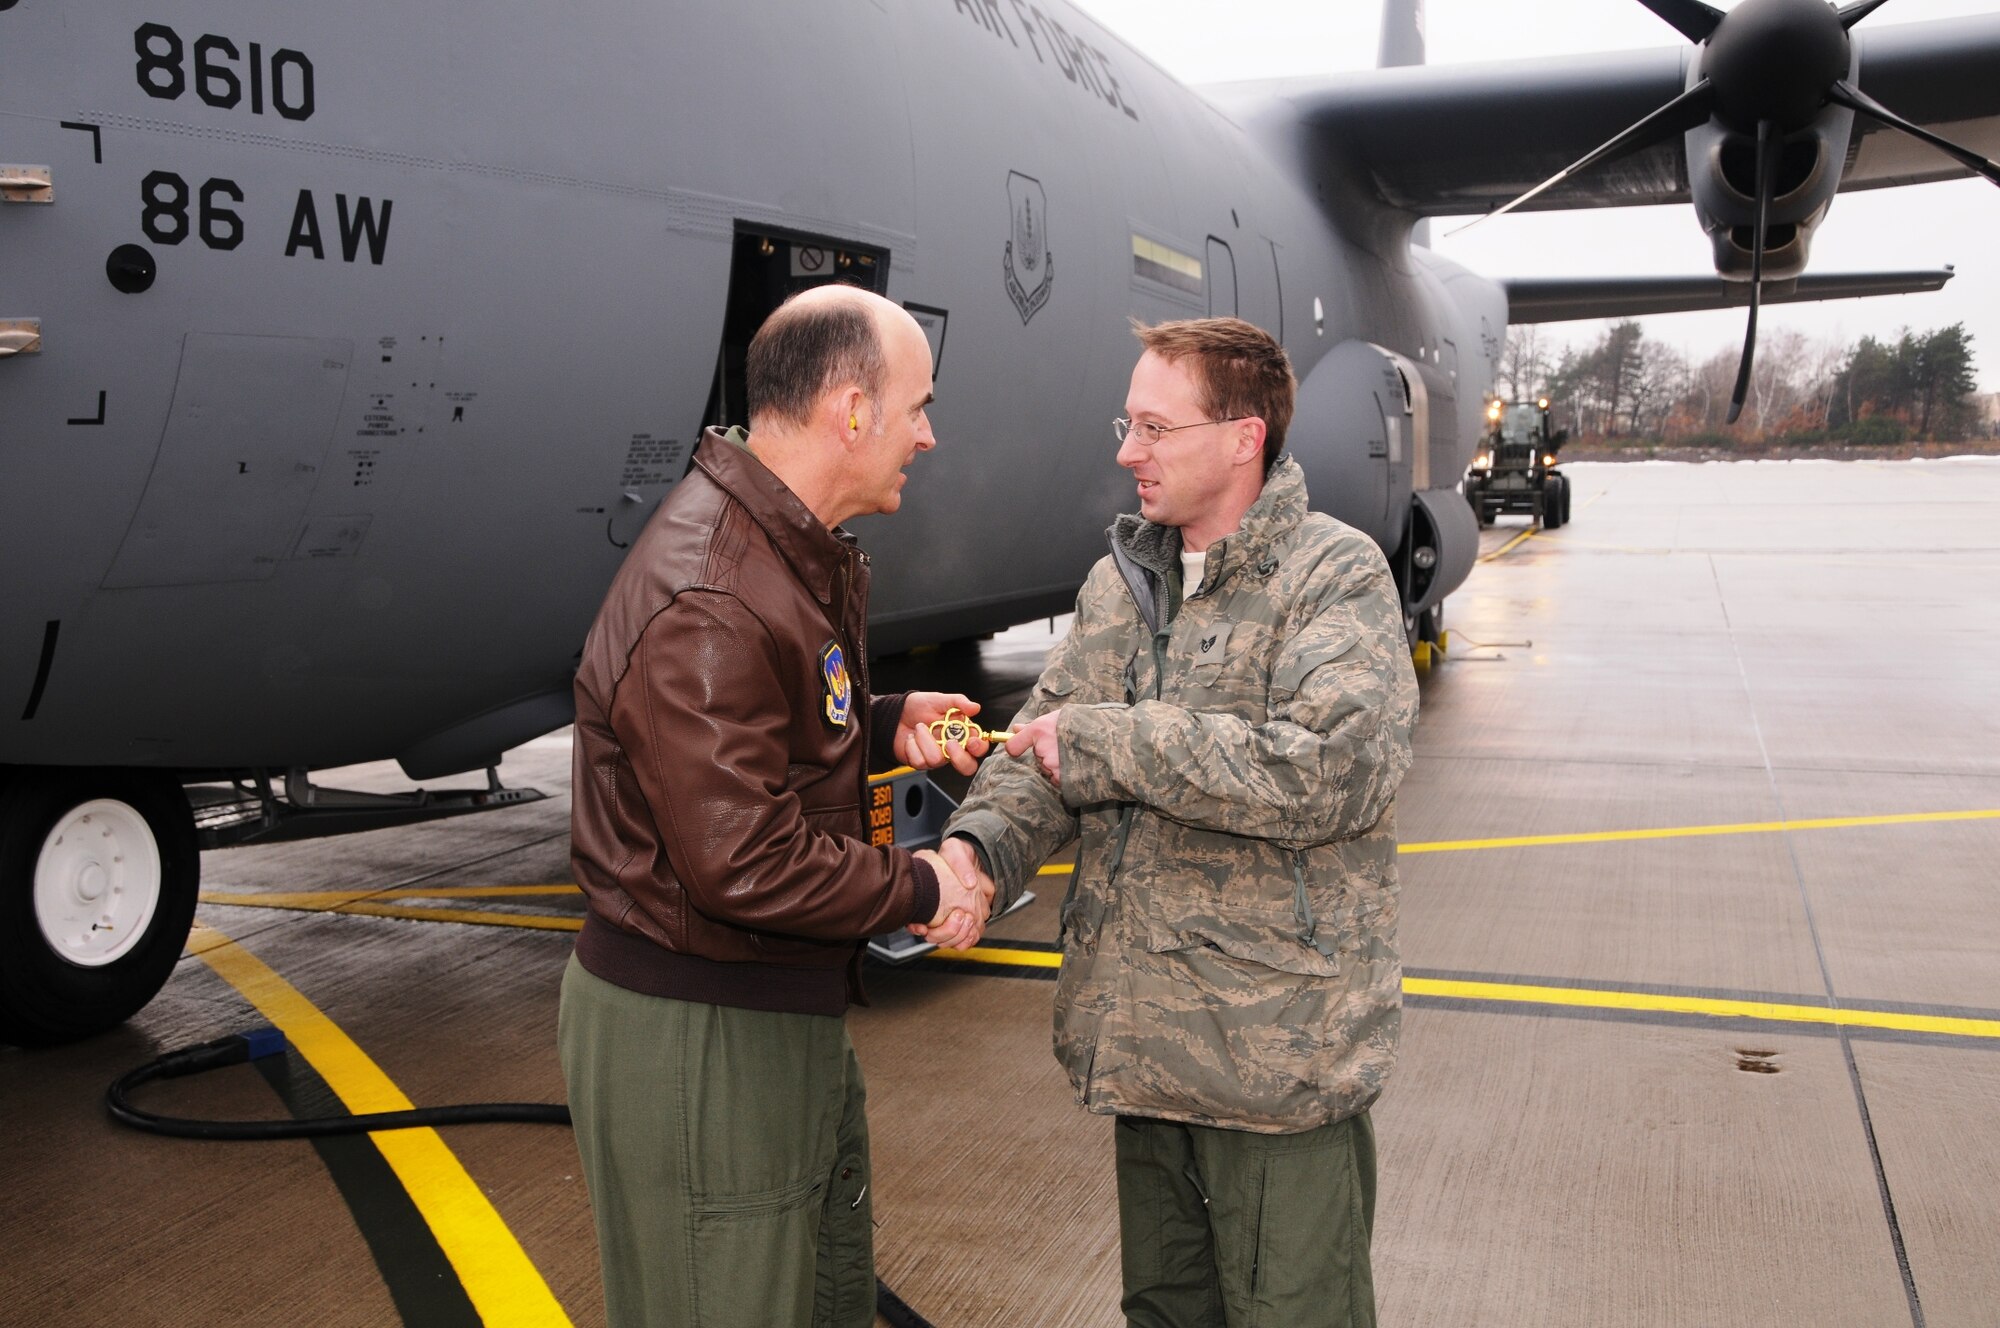 RAMSTEIN AIR BASE, Germany -- 17th Air Force Vice Commander Brig. Gen. Michael Callan hands the ceremonial key to a new C-130J Super Hercules aircraft to 86th Aircraft Maintenance Squadron crew chief Staff Sgt. Jason Keithley after landing the aircraft here Dec. 23. The J-model, one of two aircraft delivered to the 37th Airlift Squadron on the day, gives the unit a total of 10 J-models received. General Callan was latest in a series of Ramstein senior leaders selected to fly the new aircraft back from the Lockheed-Martin plant in Marietta, Ga. (U.S. Air Force photo by Master Sgt. Jim Fisher)